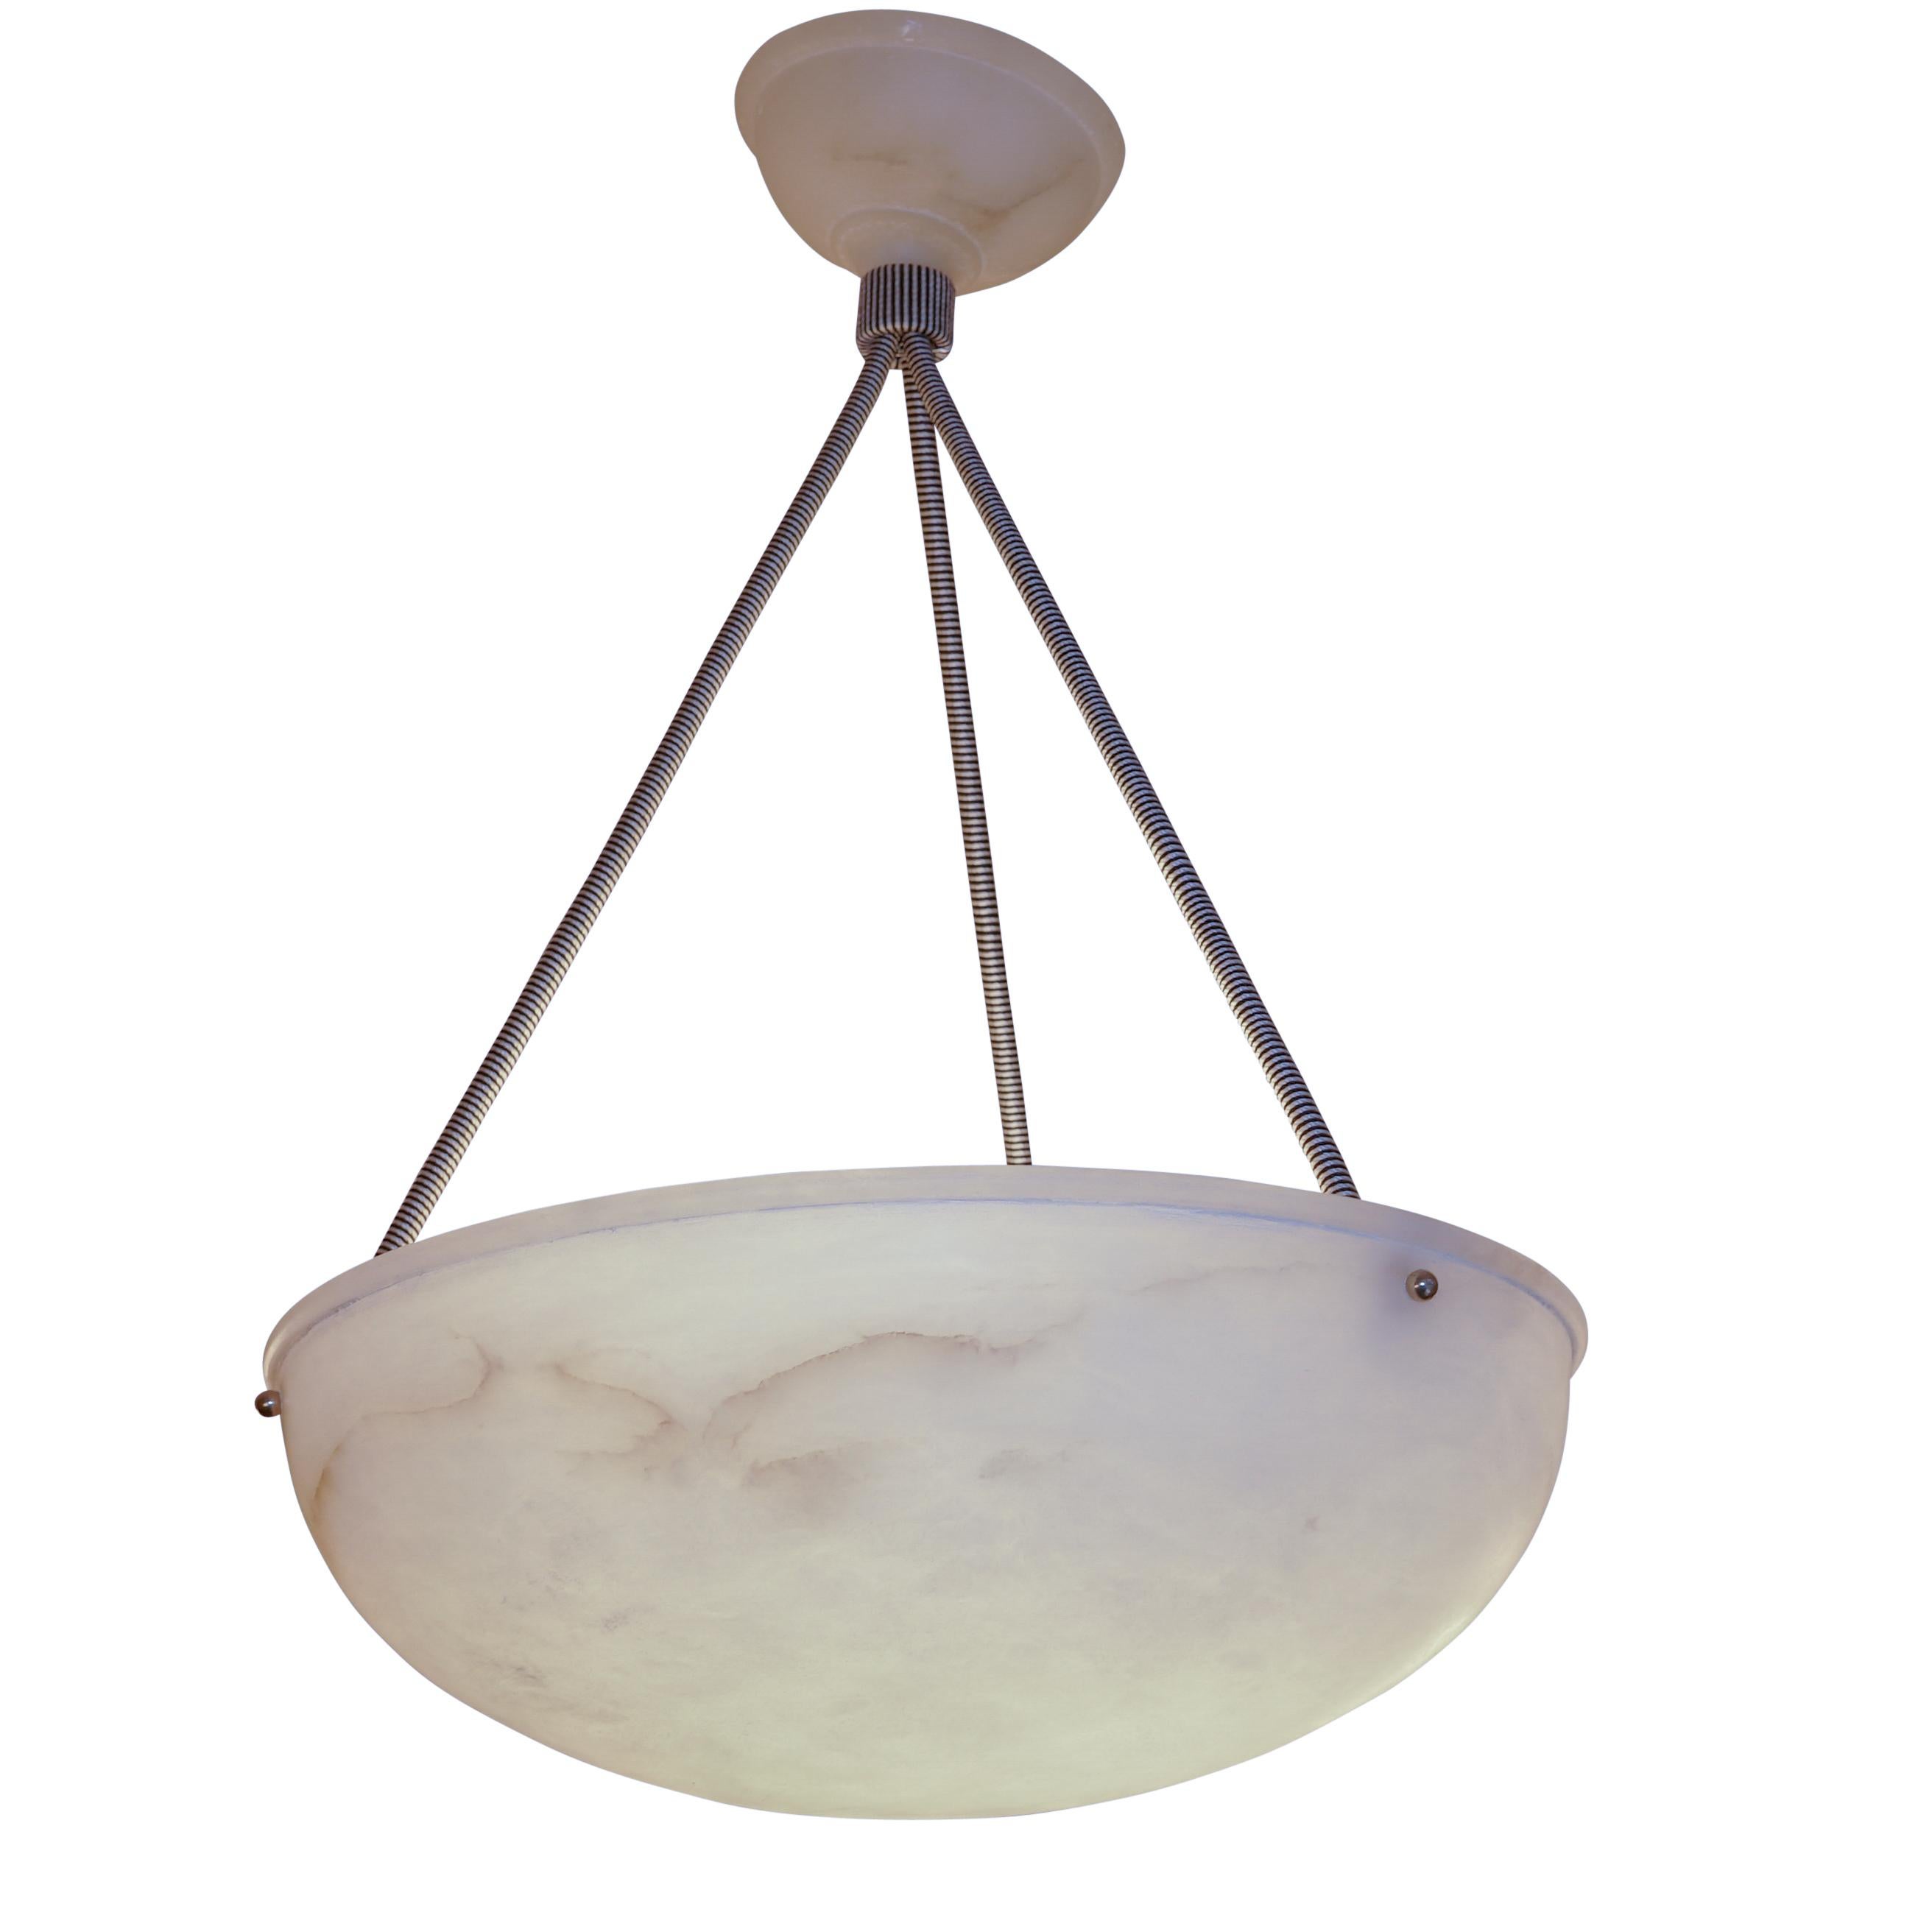 Finely fossilized alabaster with a hint of veining provides soft diffused light.